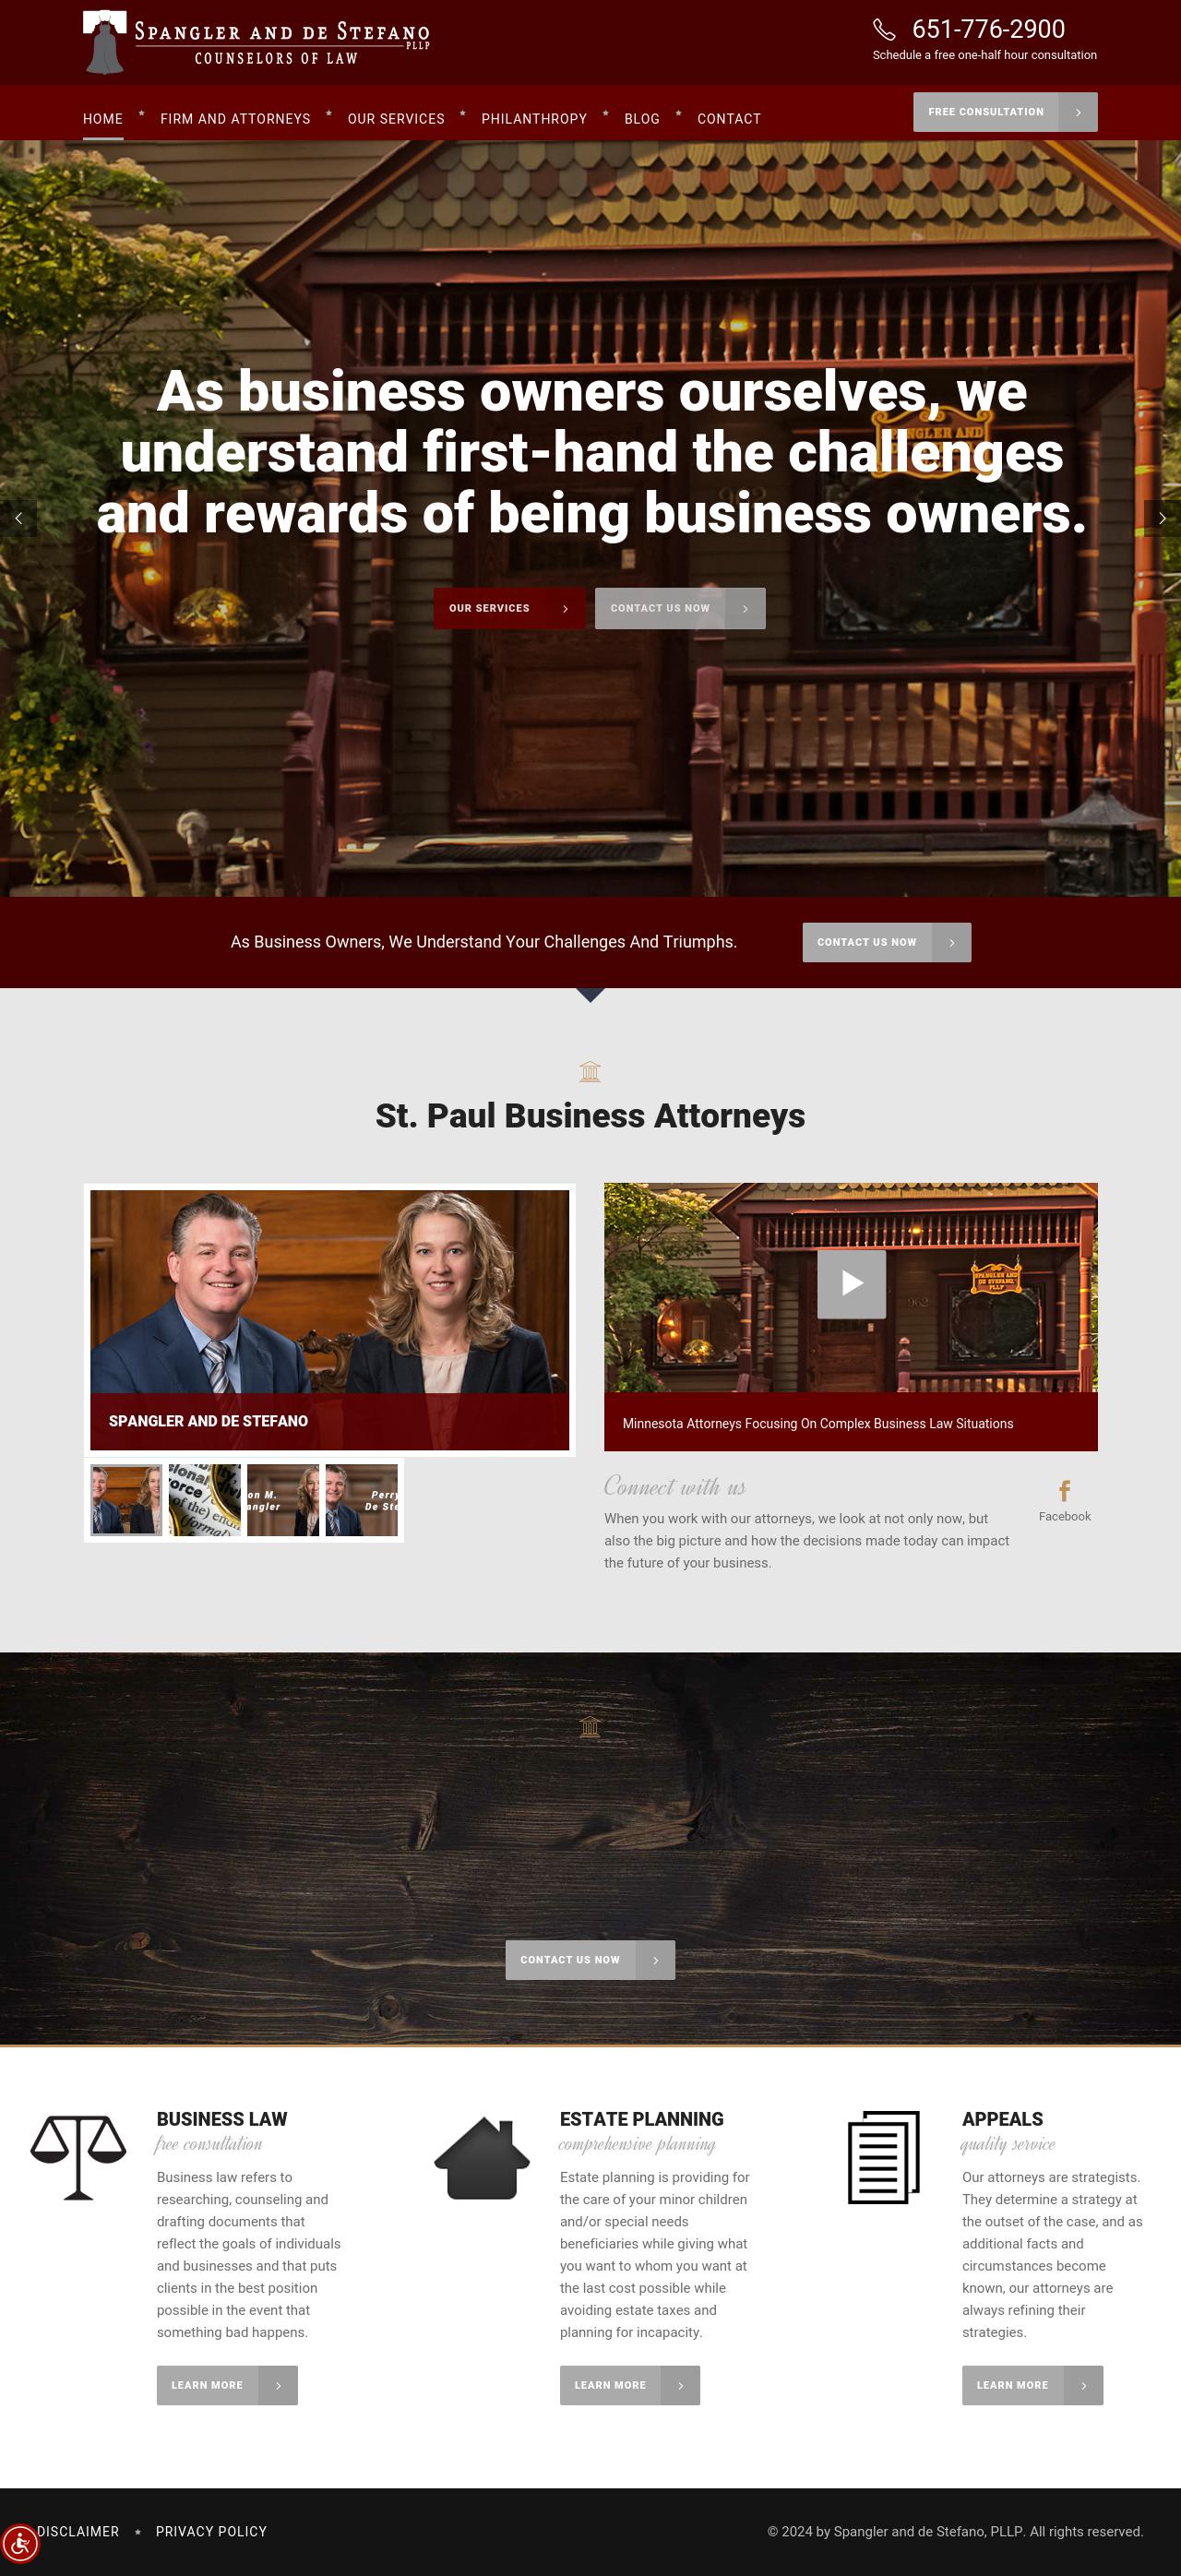 Spangler and de Stefano, PLLP - St. Paul MN Lawyers